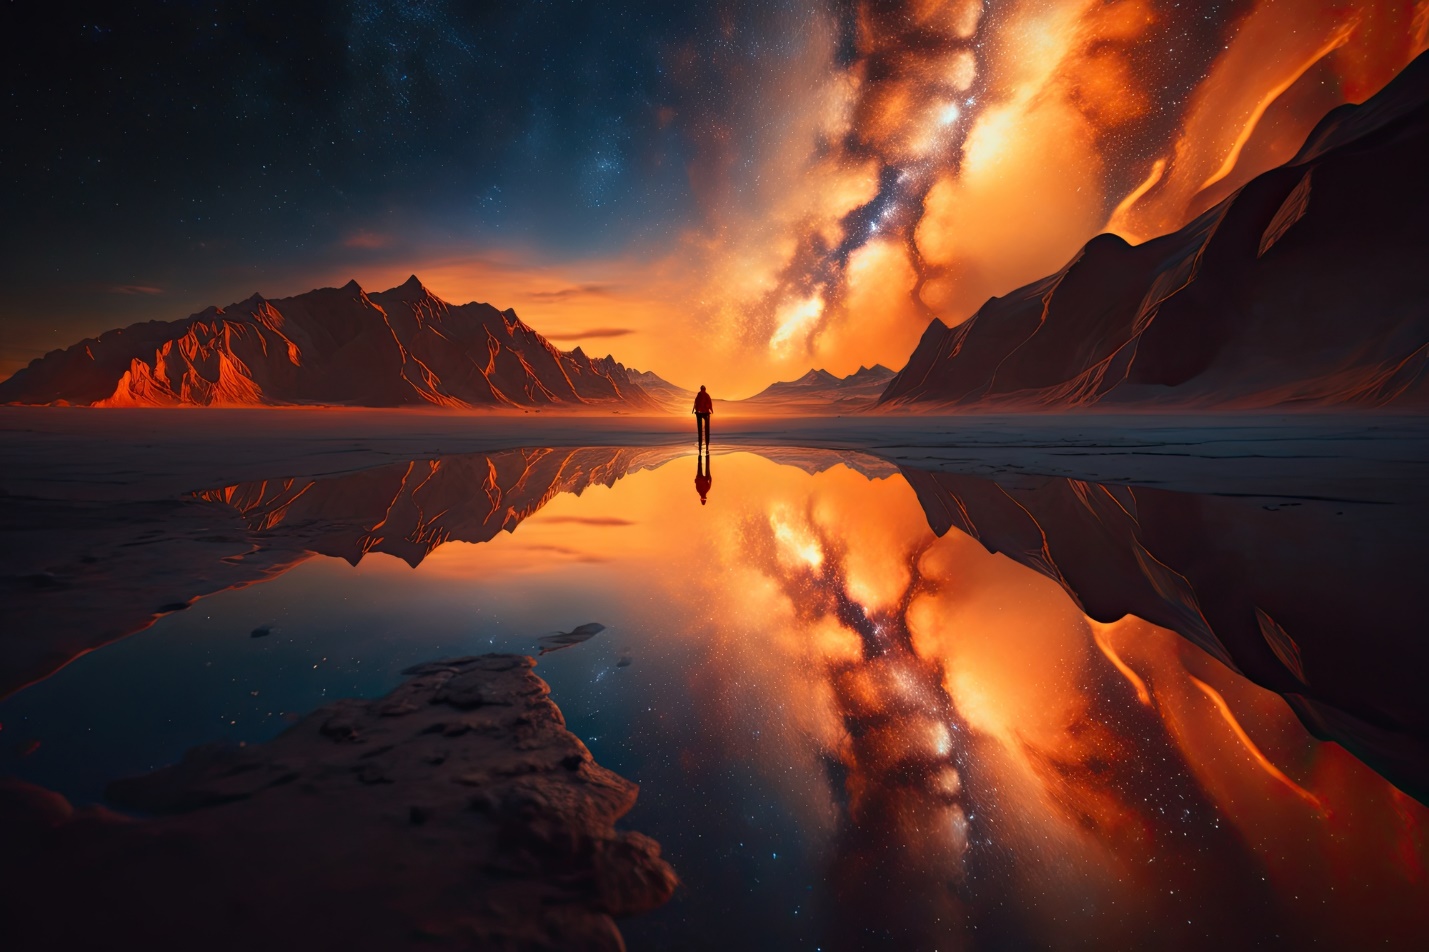 A person standing in a lake with mountains and stars in the sky

Description automatically generated